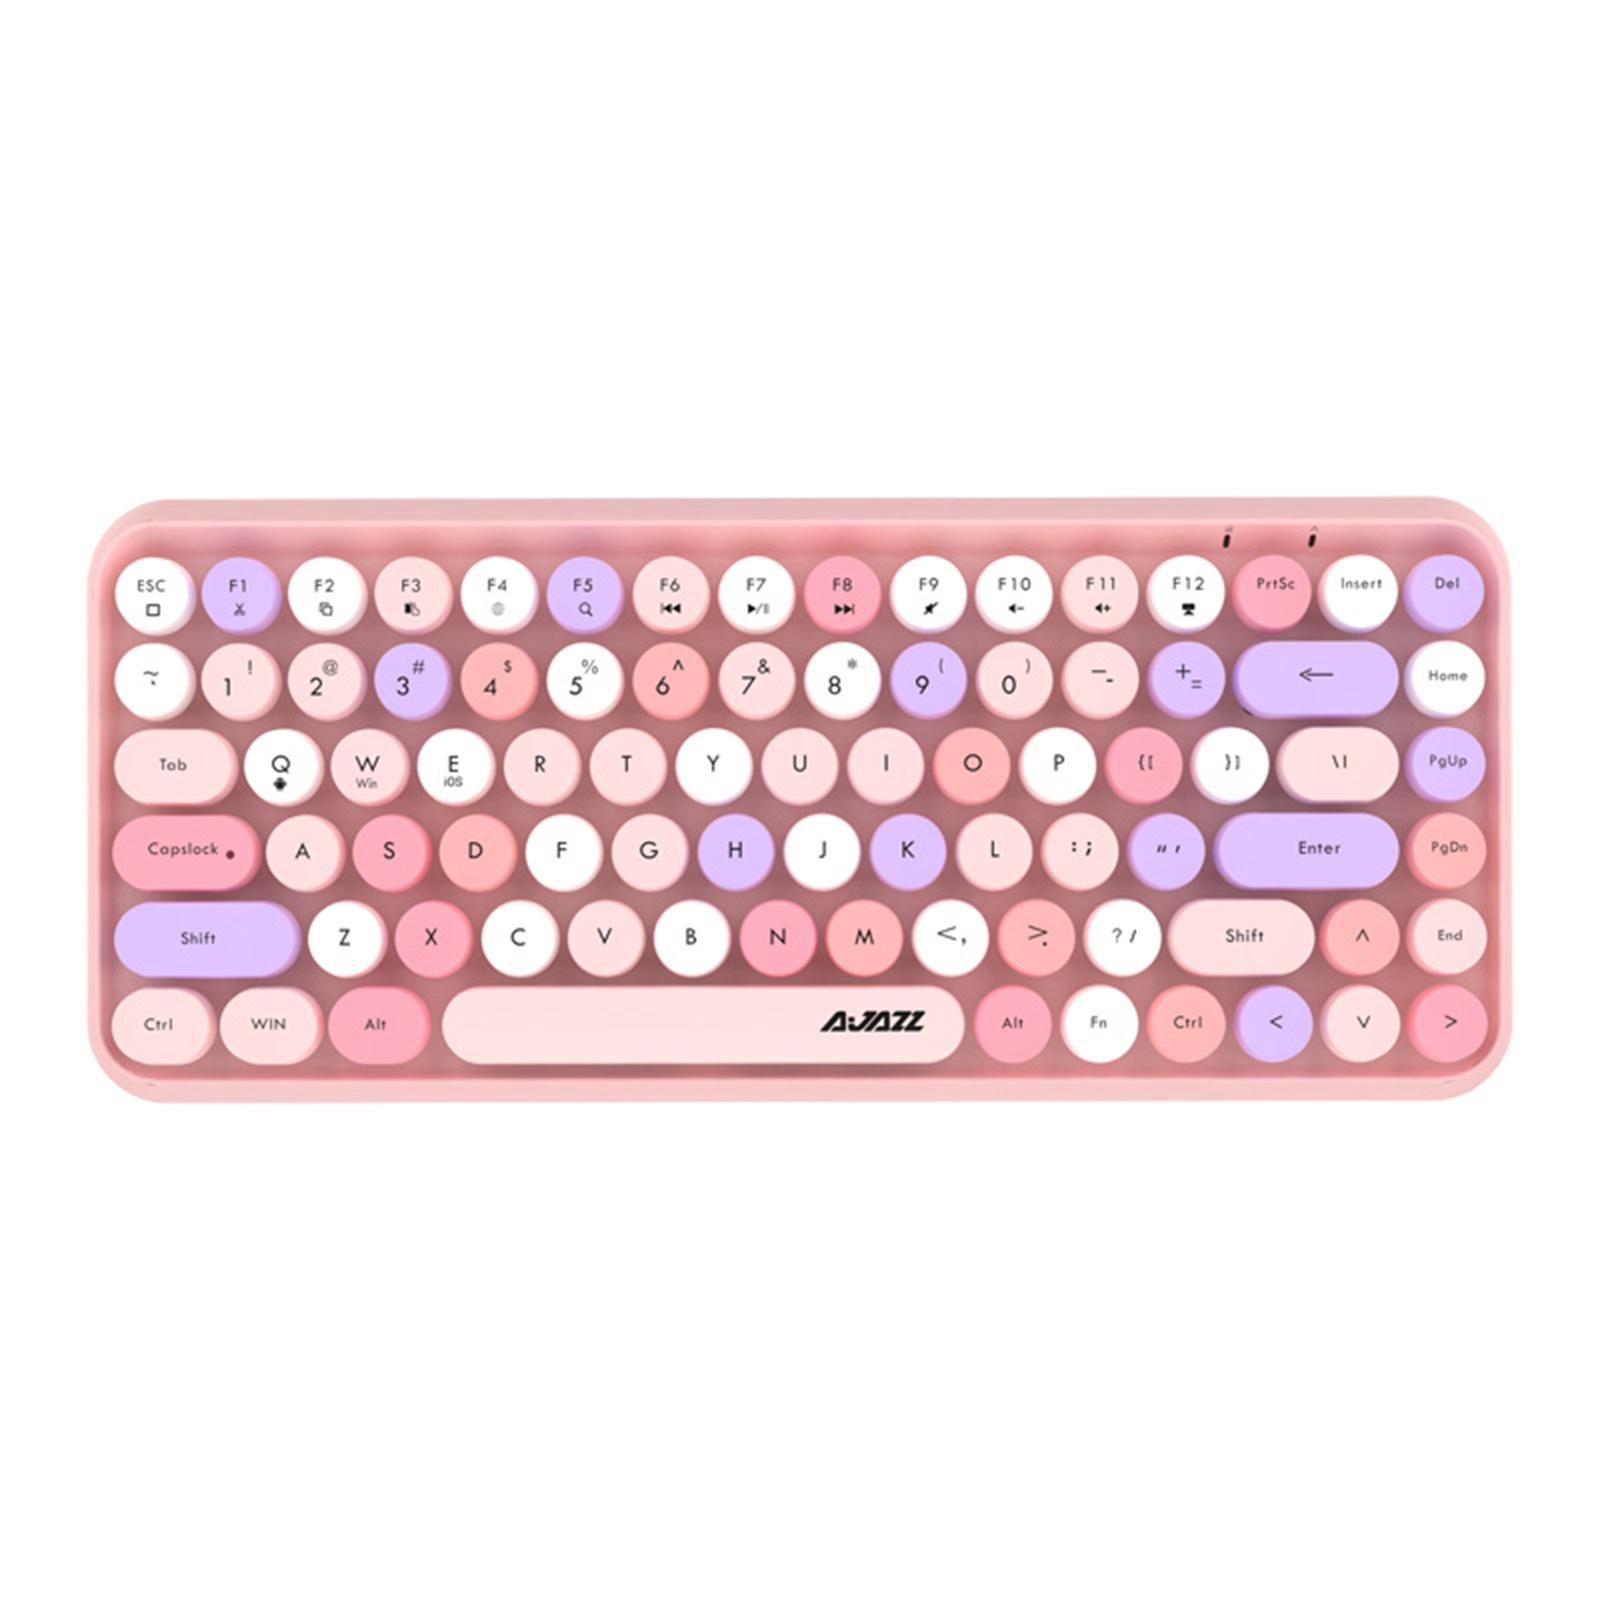 Wireless Bluetooth Keyboard Mini Portable 84-Key Keyboard for PC, Tablet, Multi-Device, Home and Office Use